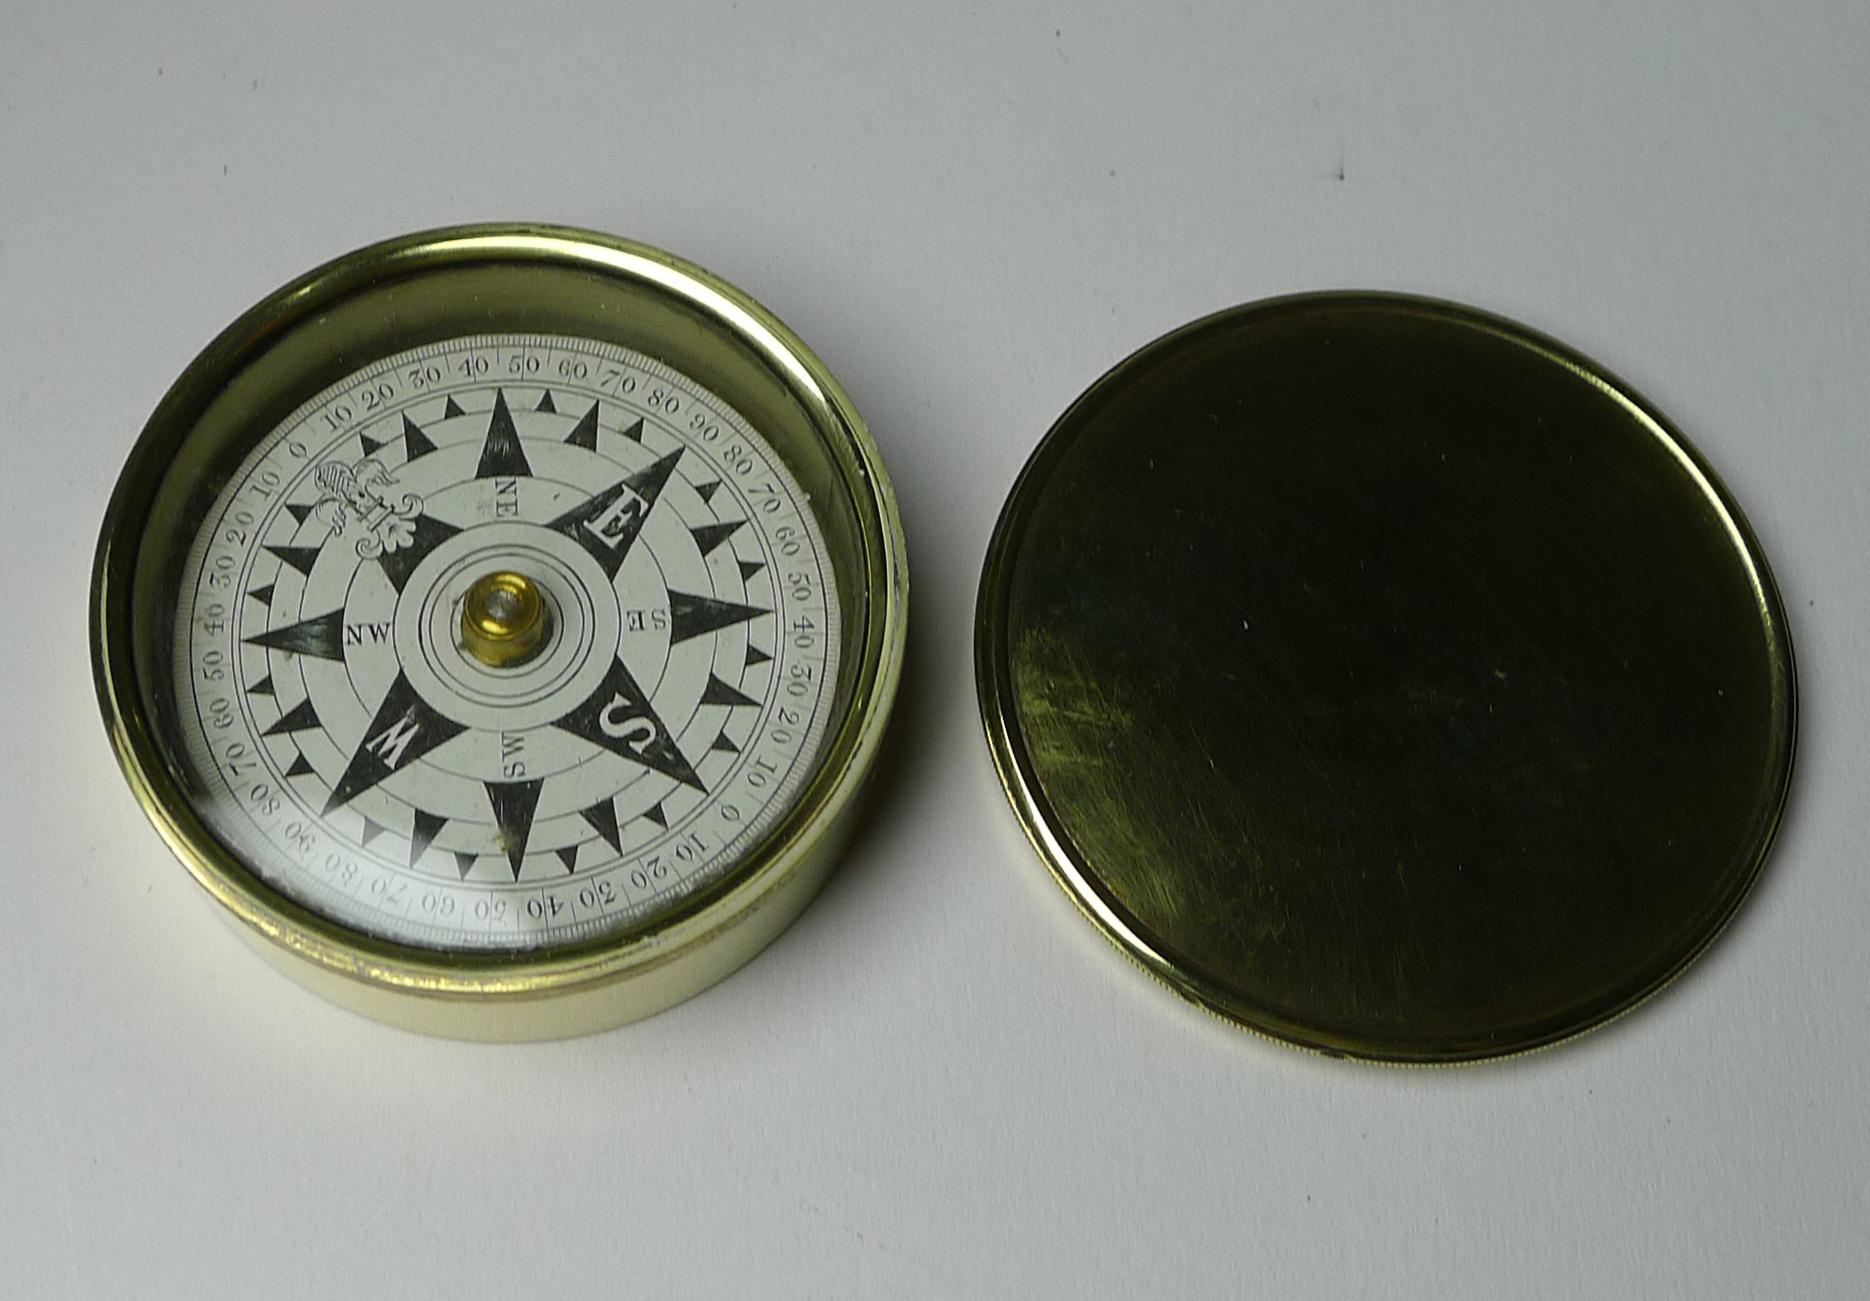 A very attractive Victorian explorers compass dating to around 1890.

The floating card dial pivots on a bearing and is housed under a glass crystal which is clean and free from any chips.

Excellent condition measuring 2